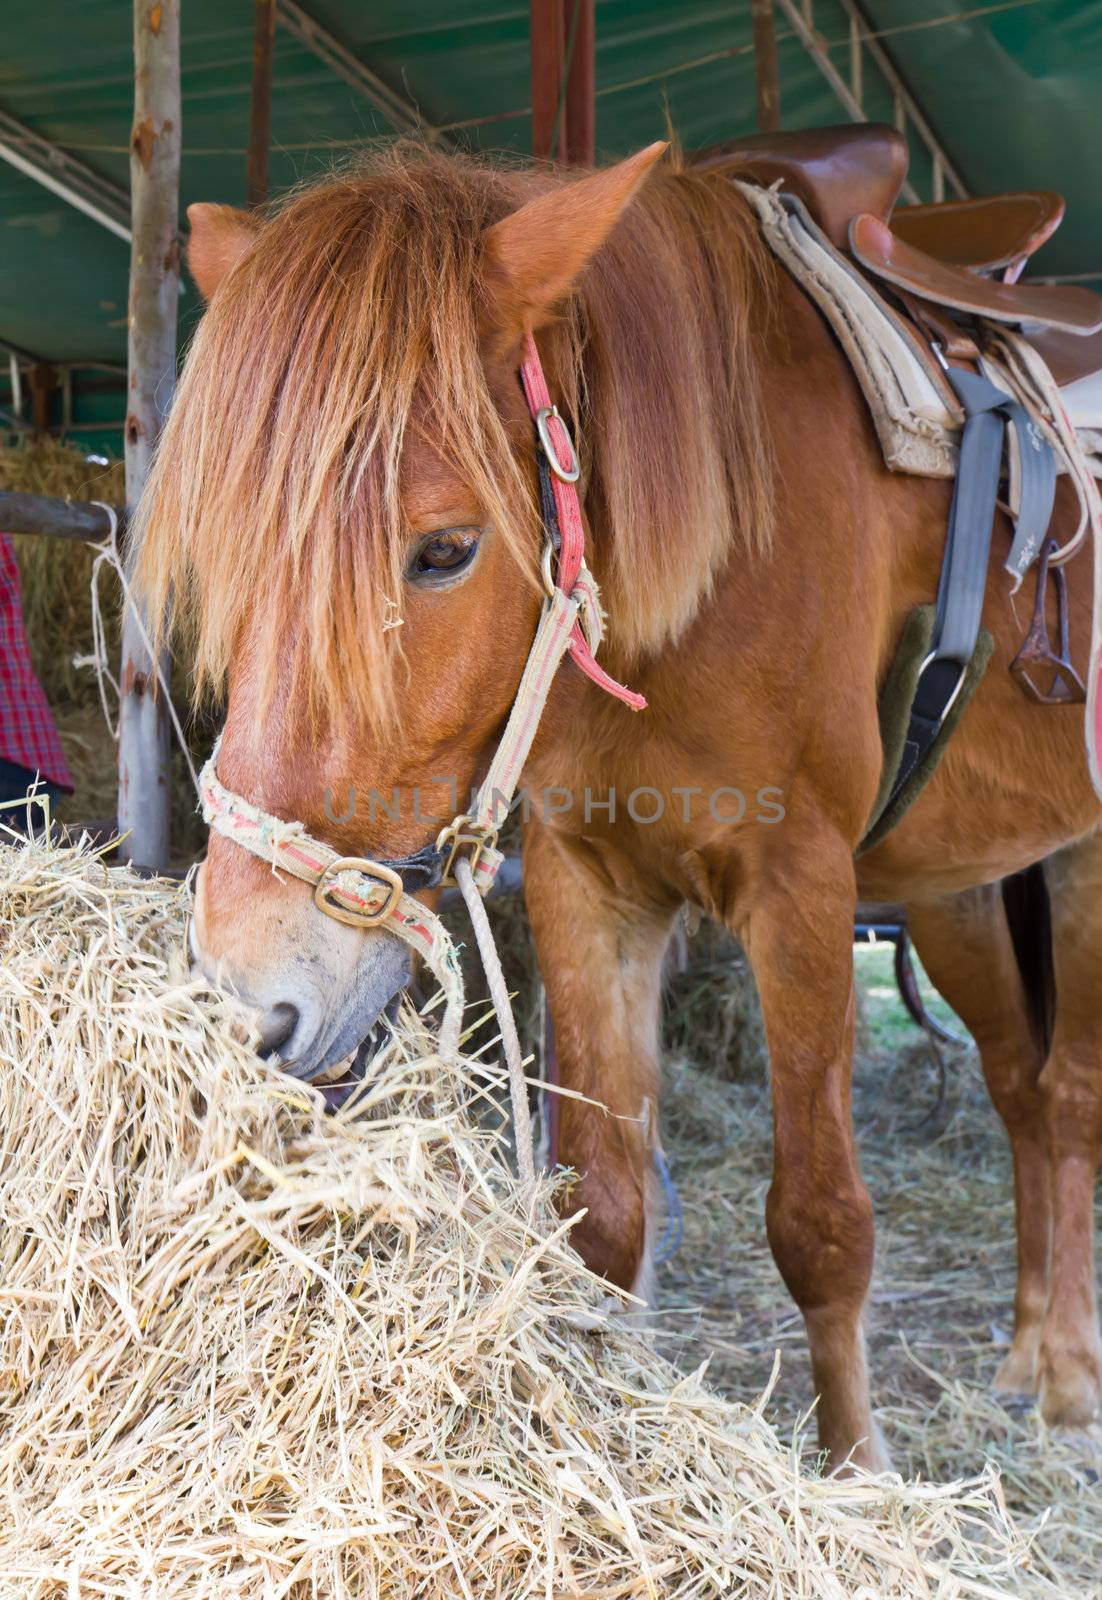 Horse in farm eating straw